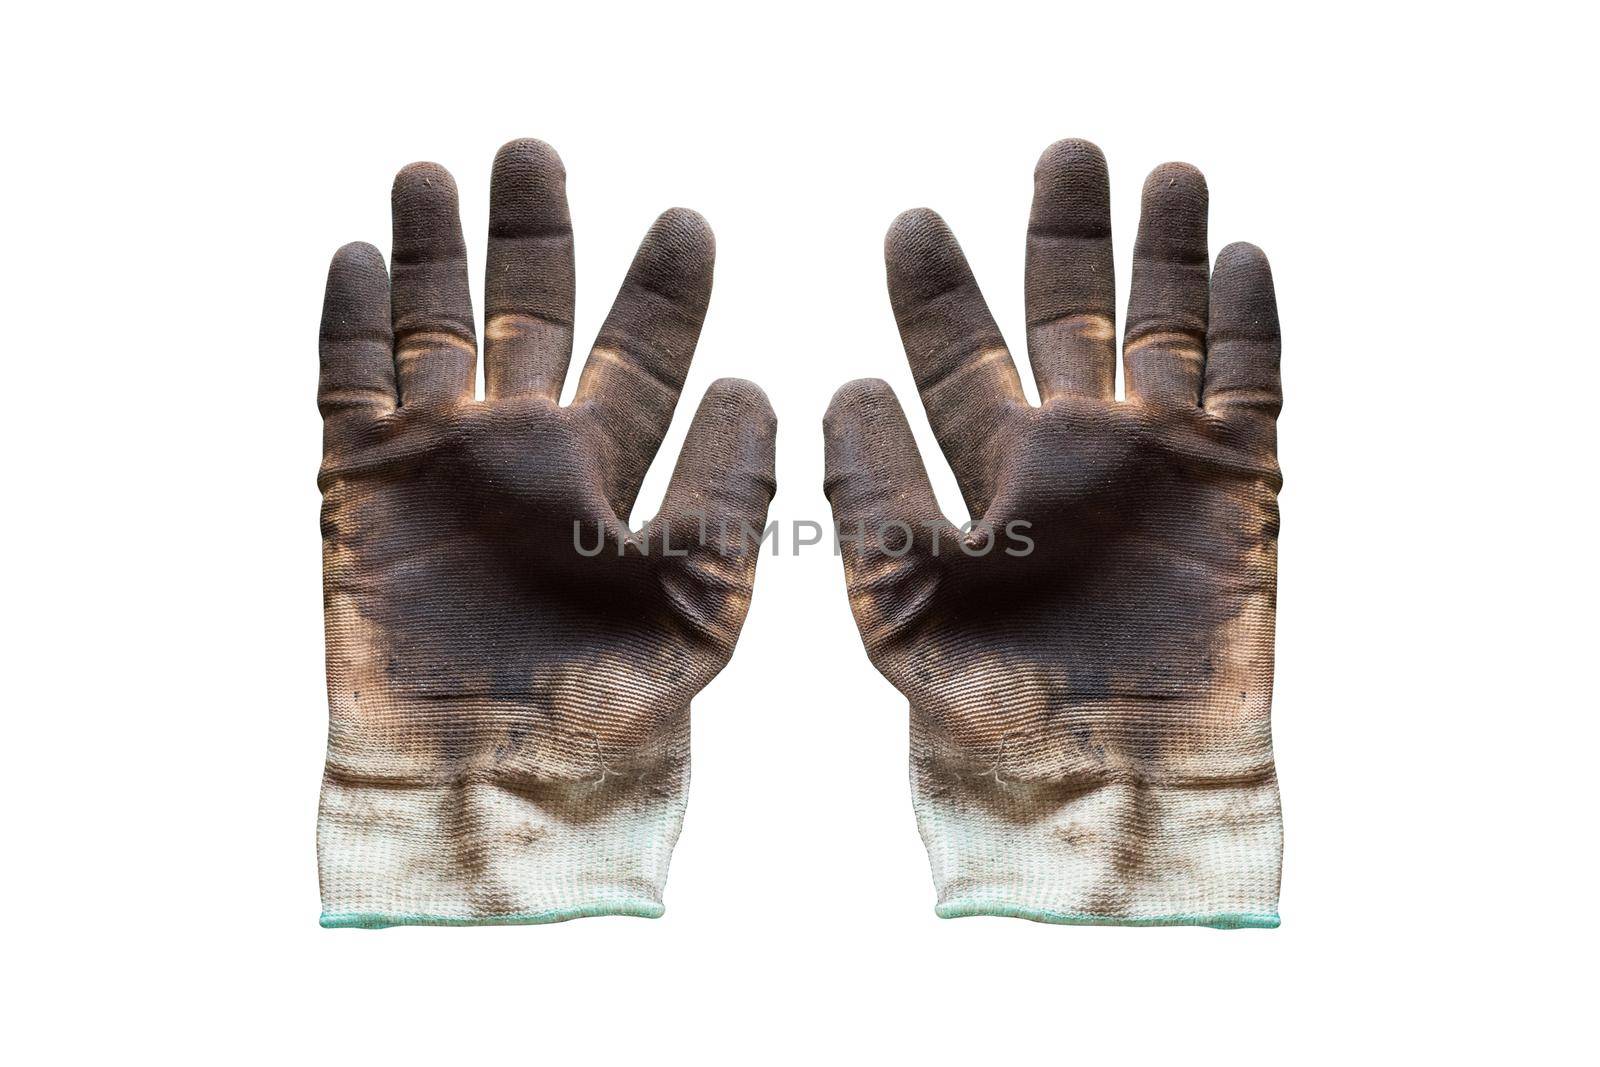 Glove with oil stain on isolated background. Used gloves are dirty.